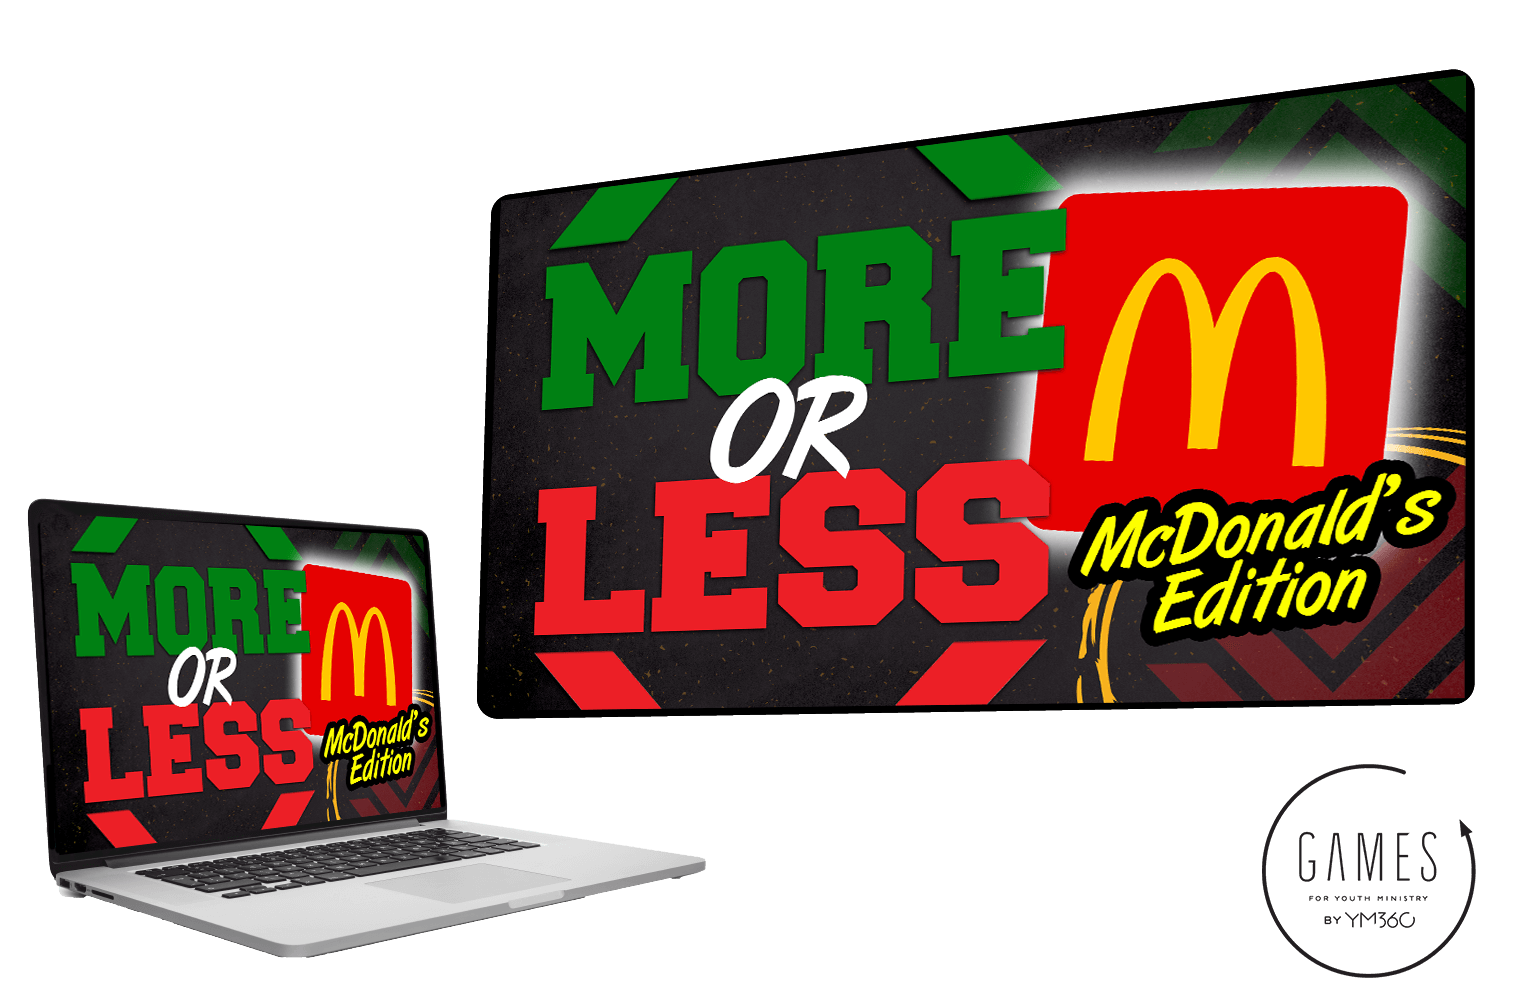 More or Less: McDonald's Edition